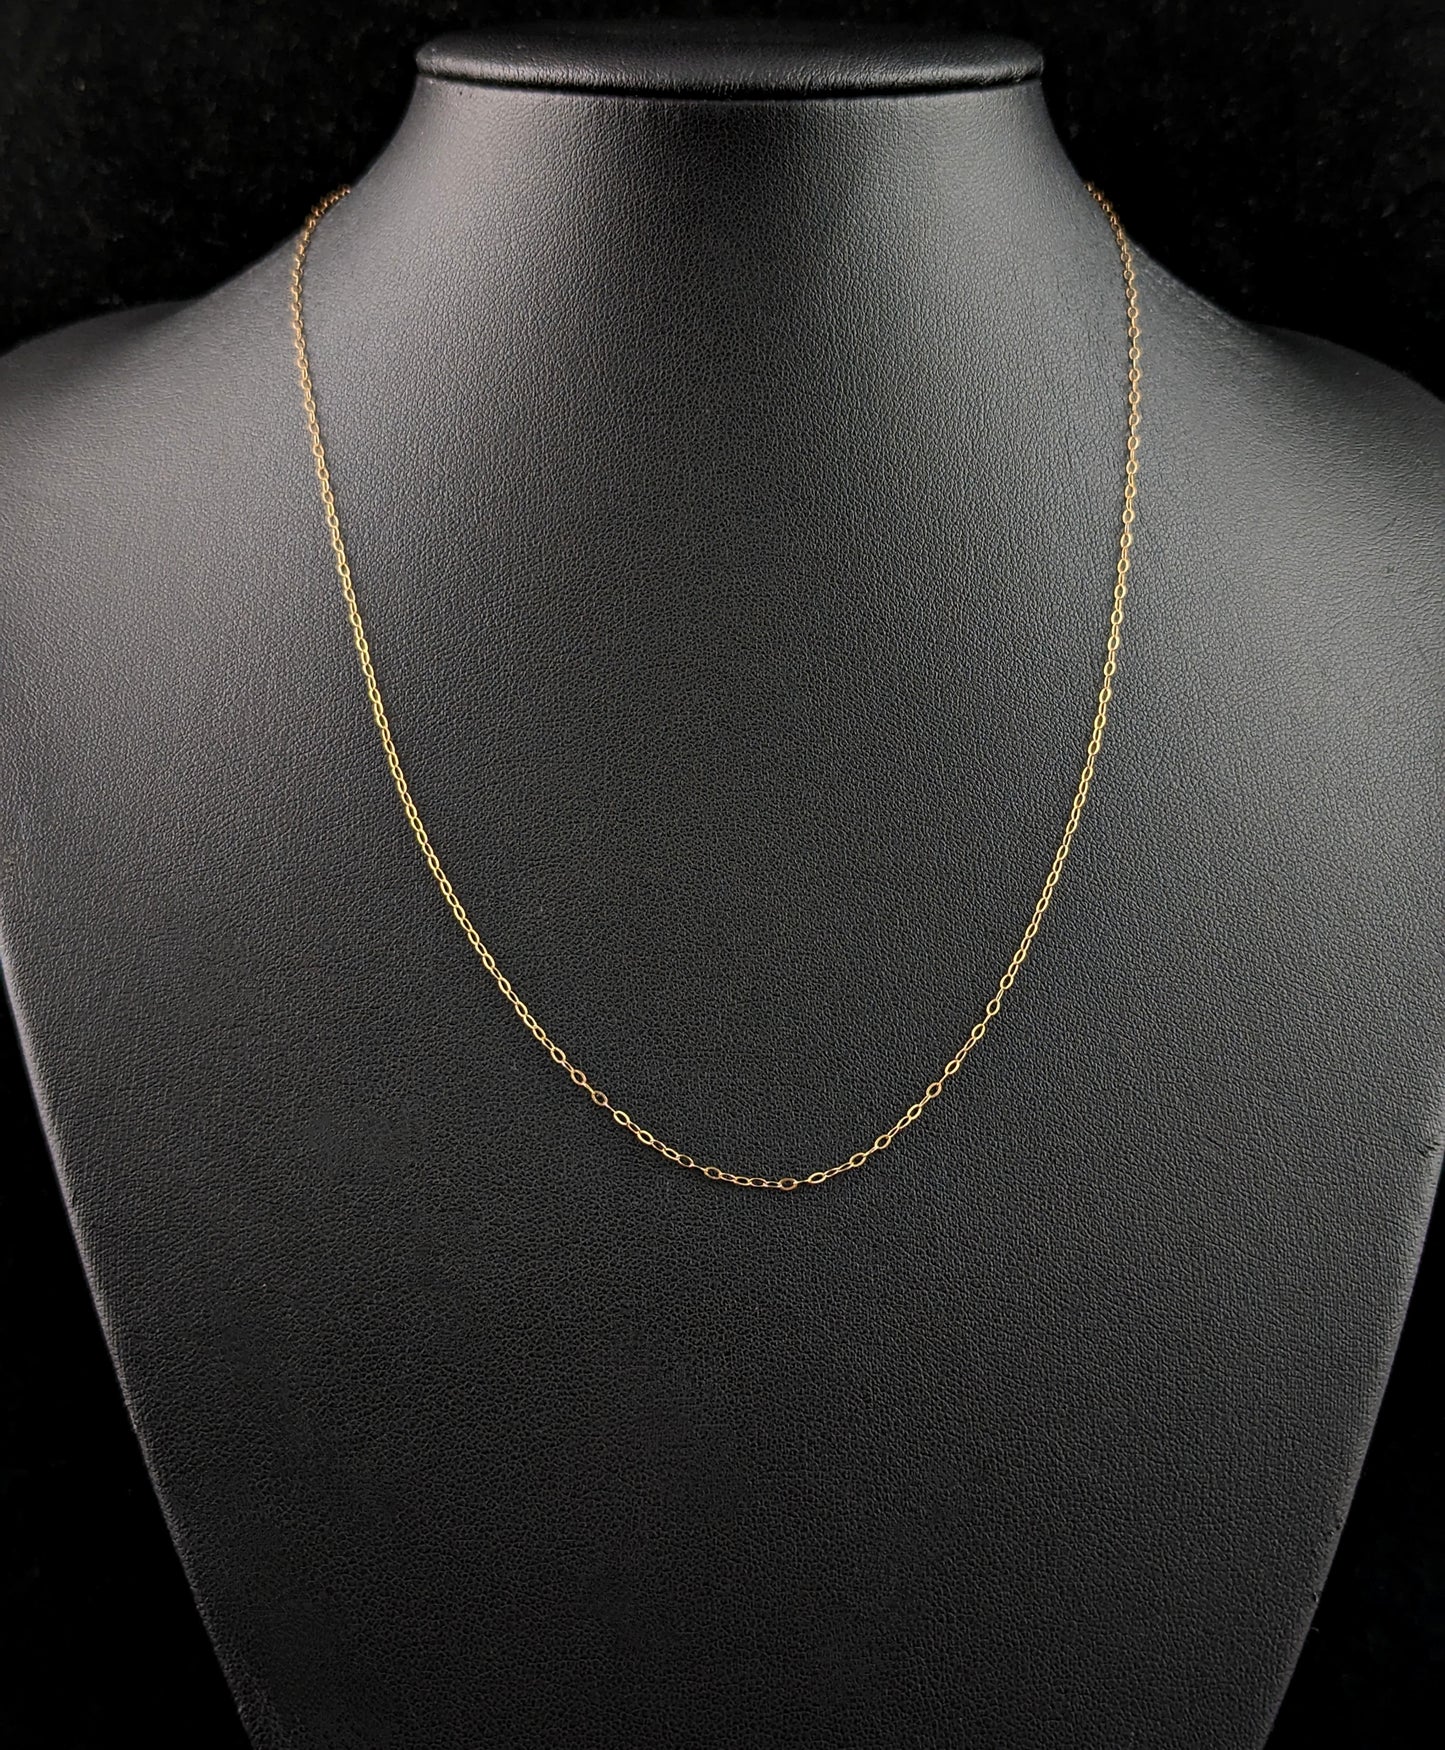 Vintage 9ct yellow gold trace chain necklace, dainty, fine